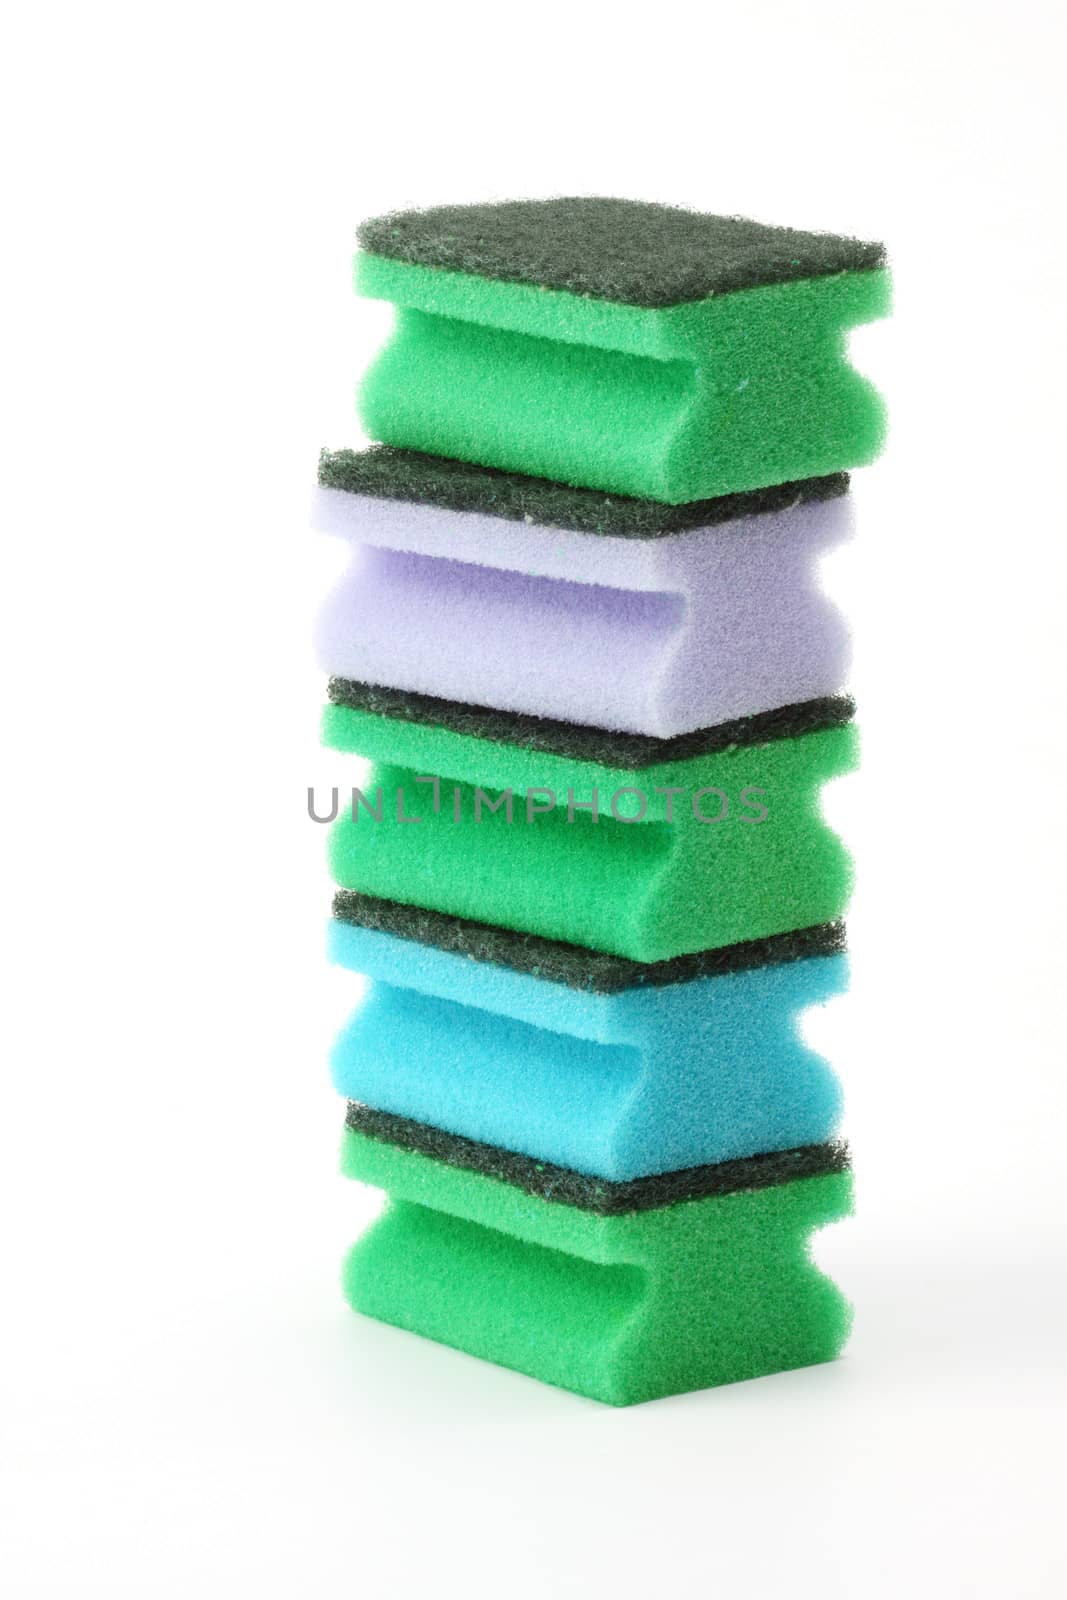 A pile of  kitchen sponges on white